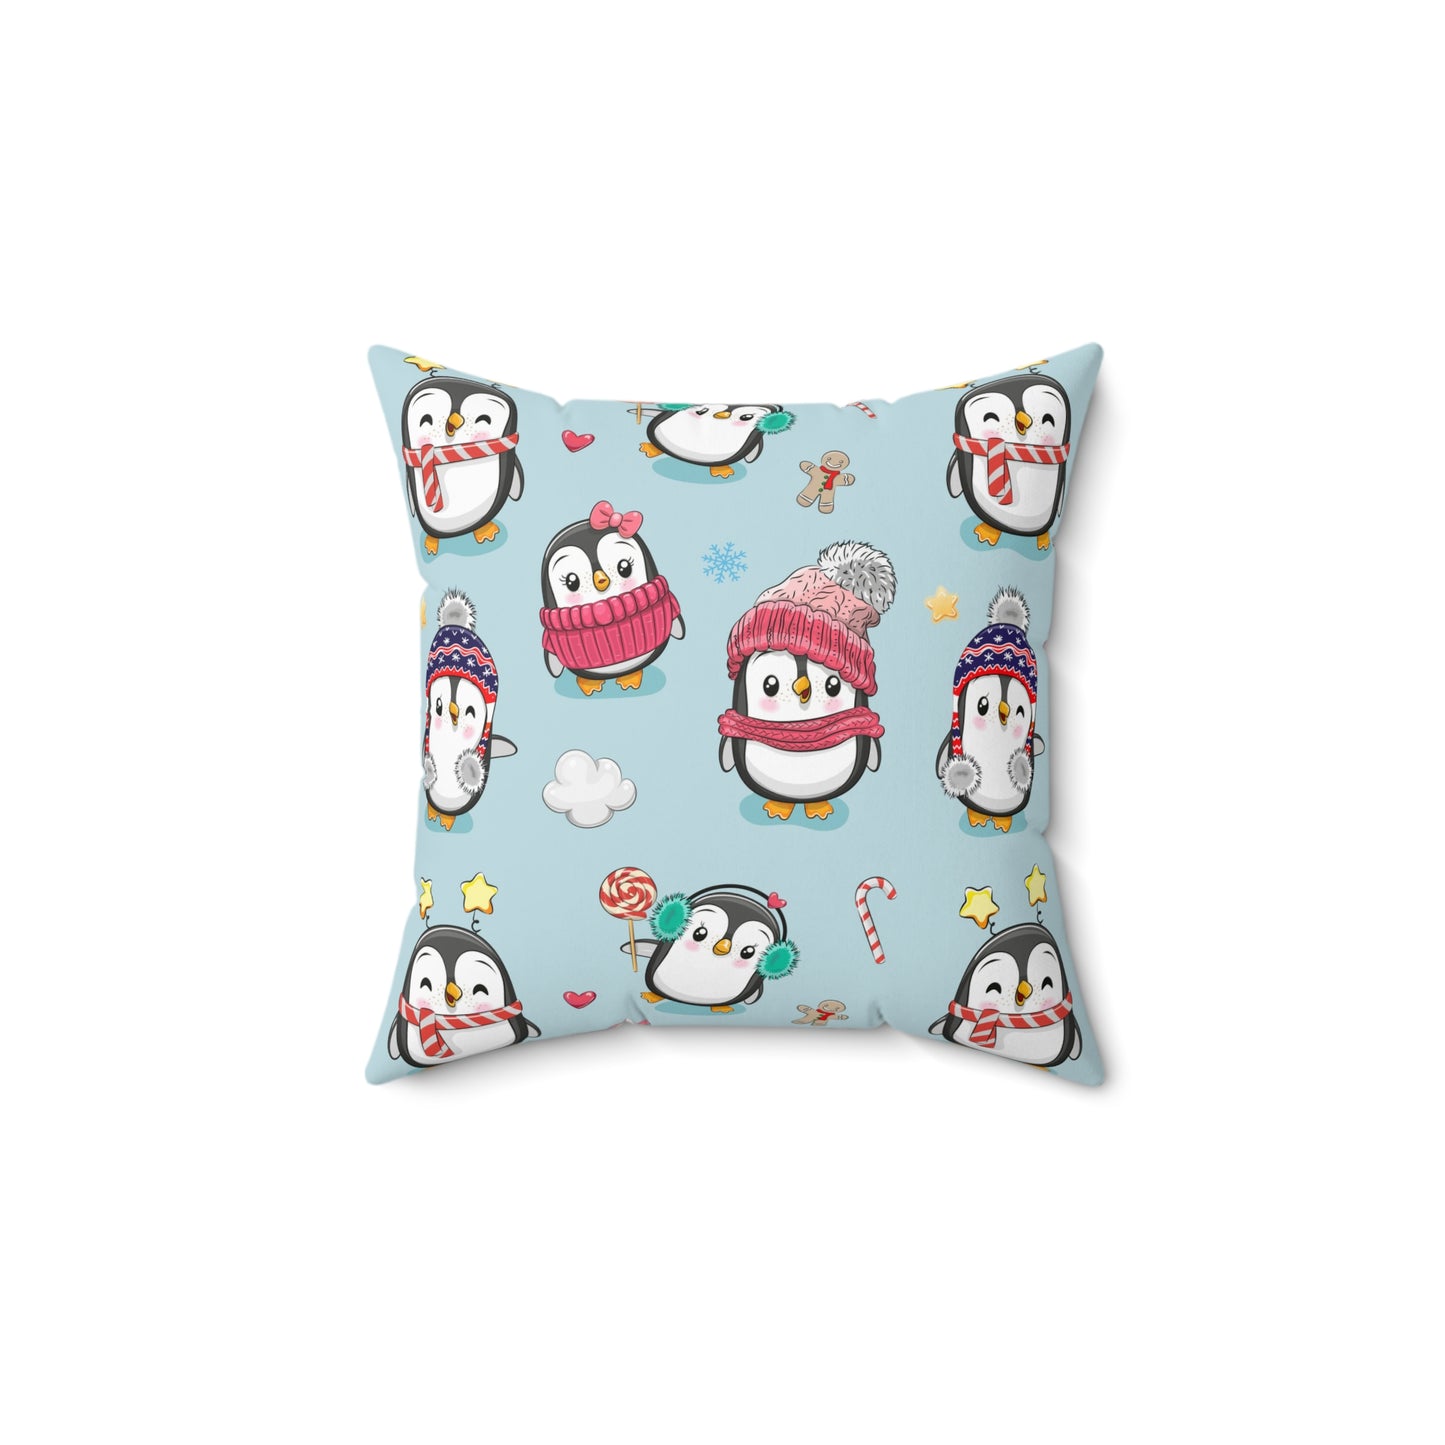 Penguins in Winter Clothes Spun Polyester Square Pillow